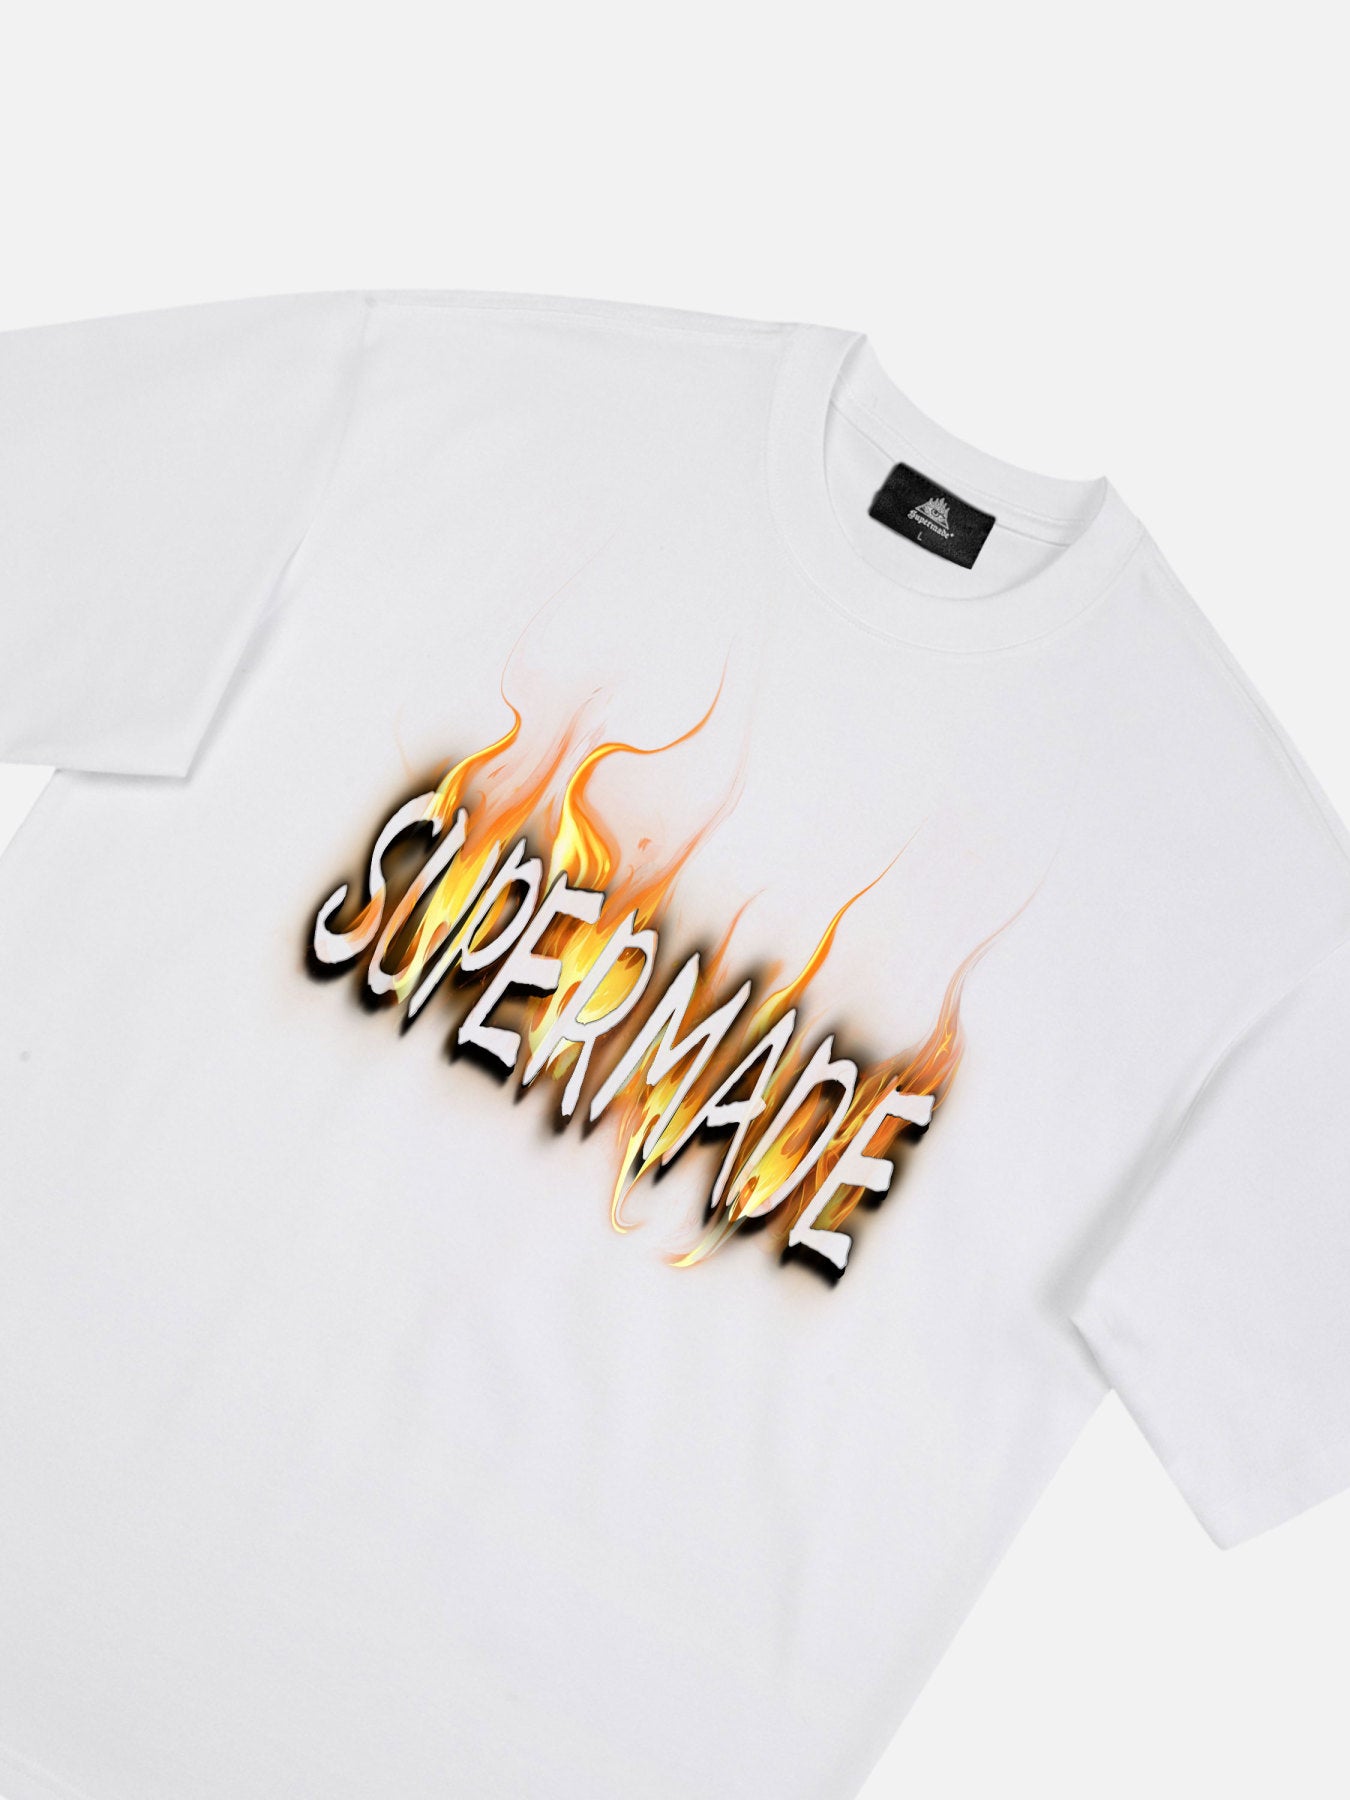 The Supermade Burning Letters Print T-shirt